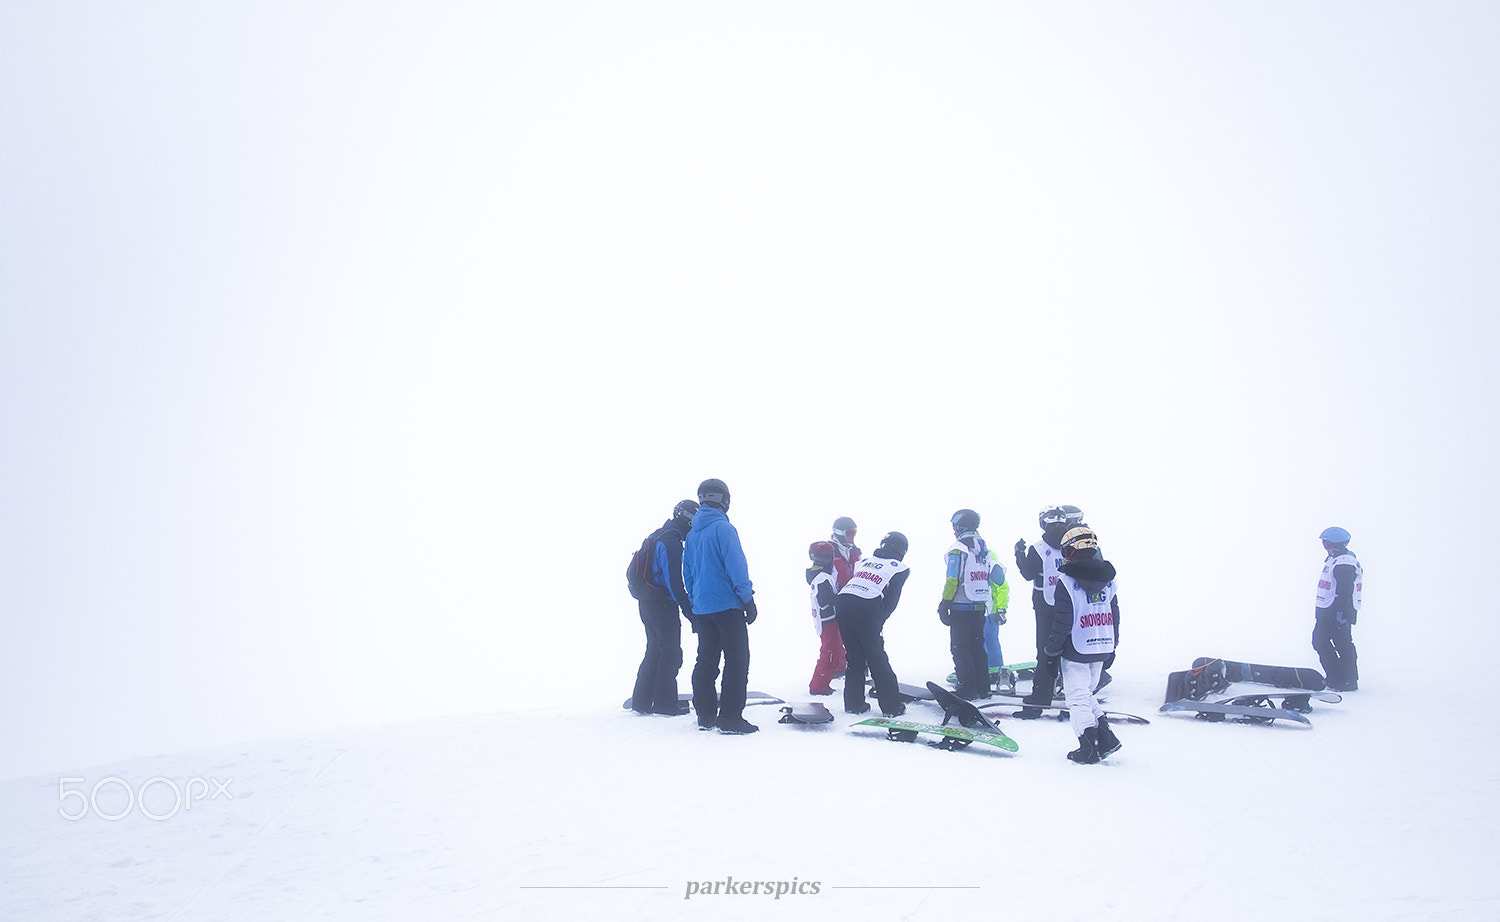 Fujifilm X-T10 sample photo. Foggy conditions on the piste photography